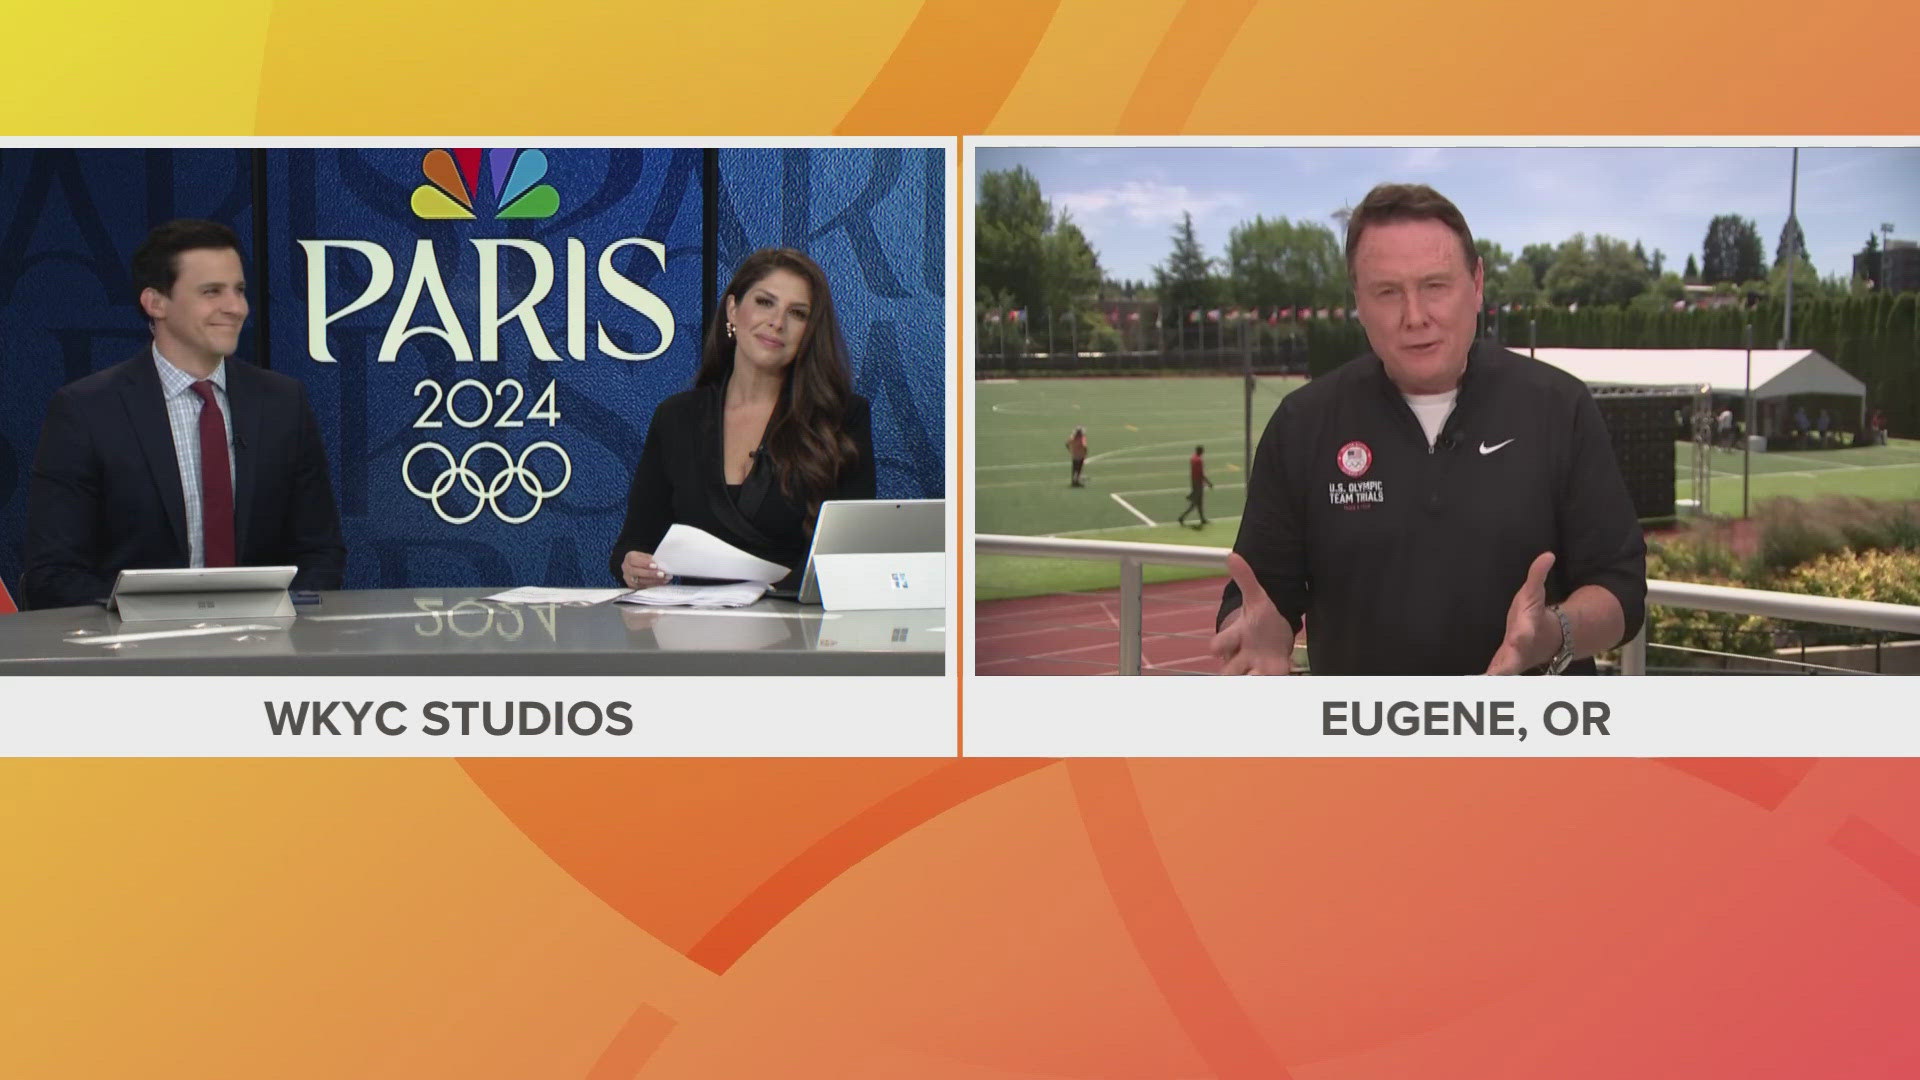 NBC's Jay Gray ends his report from the USA Track & Field Olympic Trials with a goodbye message for 3News' Laura Caso on her last day at the station.